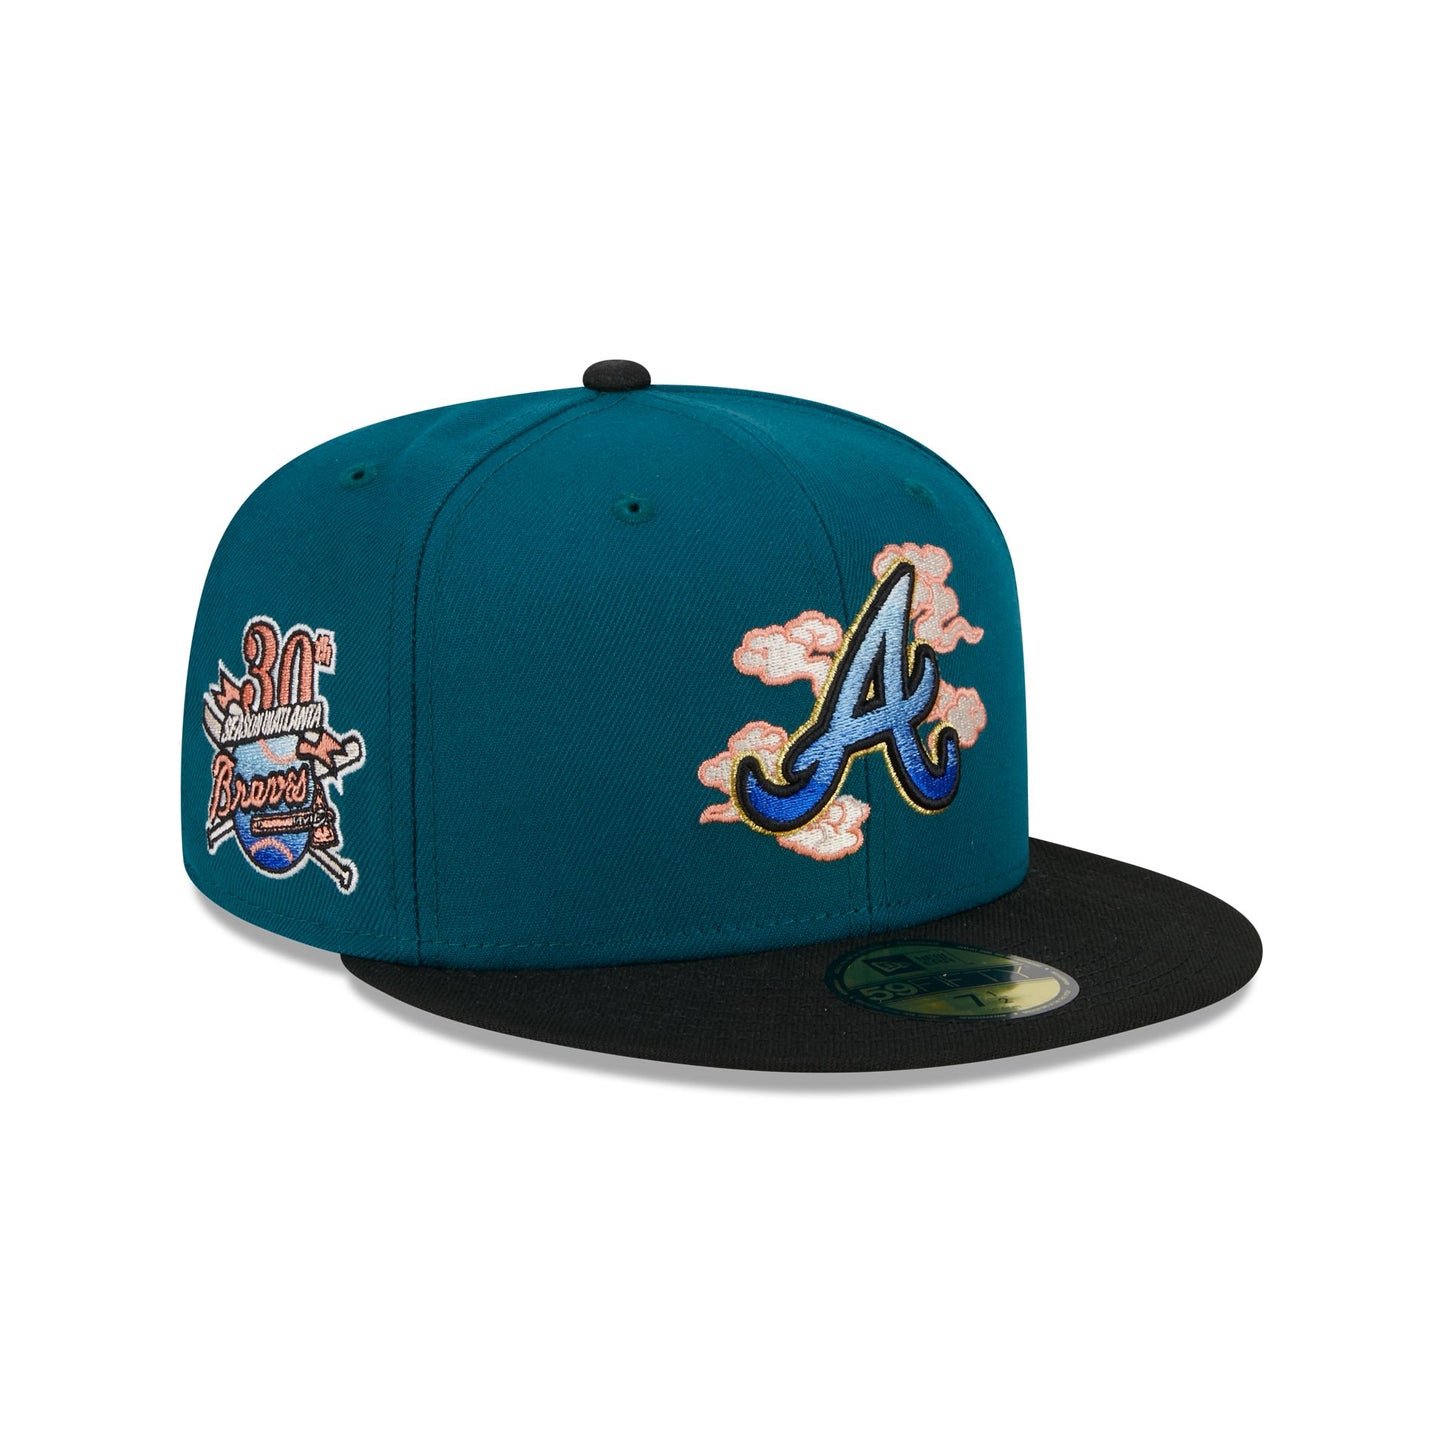 Shop New Era 59Fifty Atlanta Braves Sunflower Seeds Fitted Hat 70712075 blue